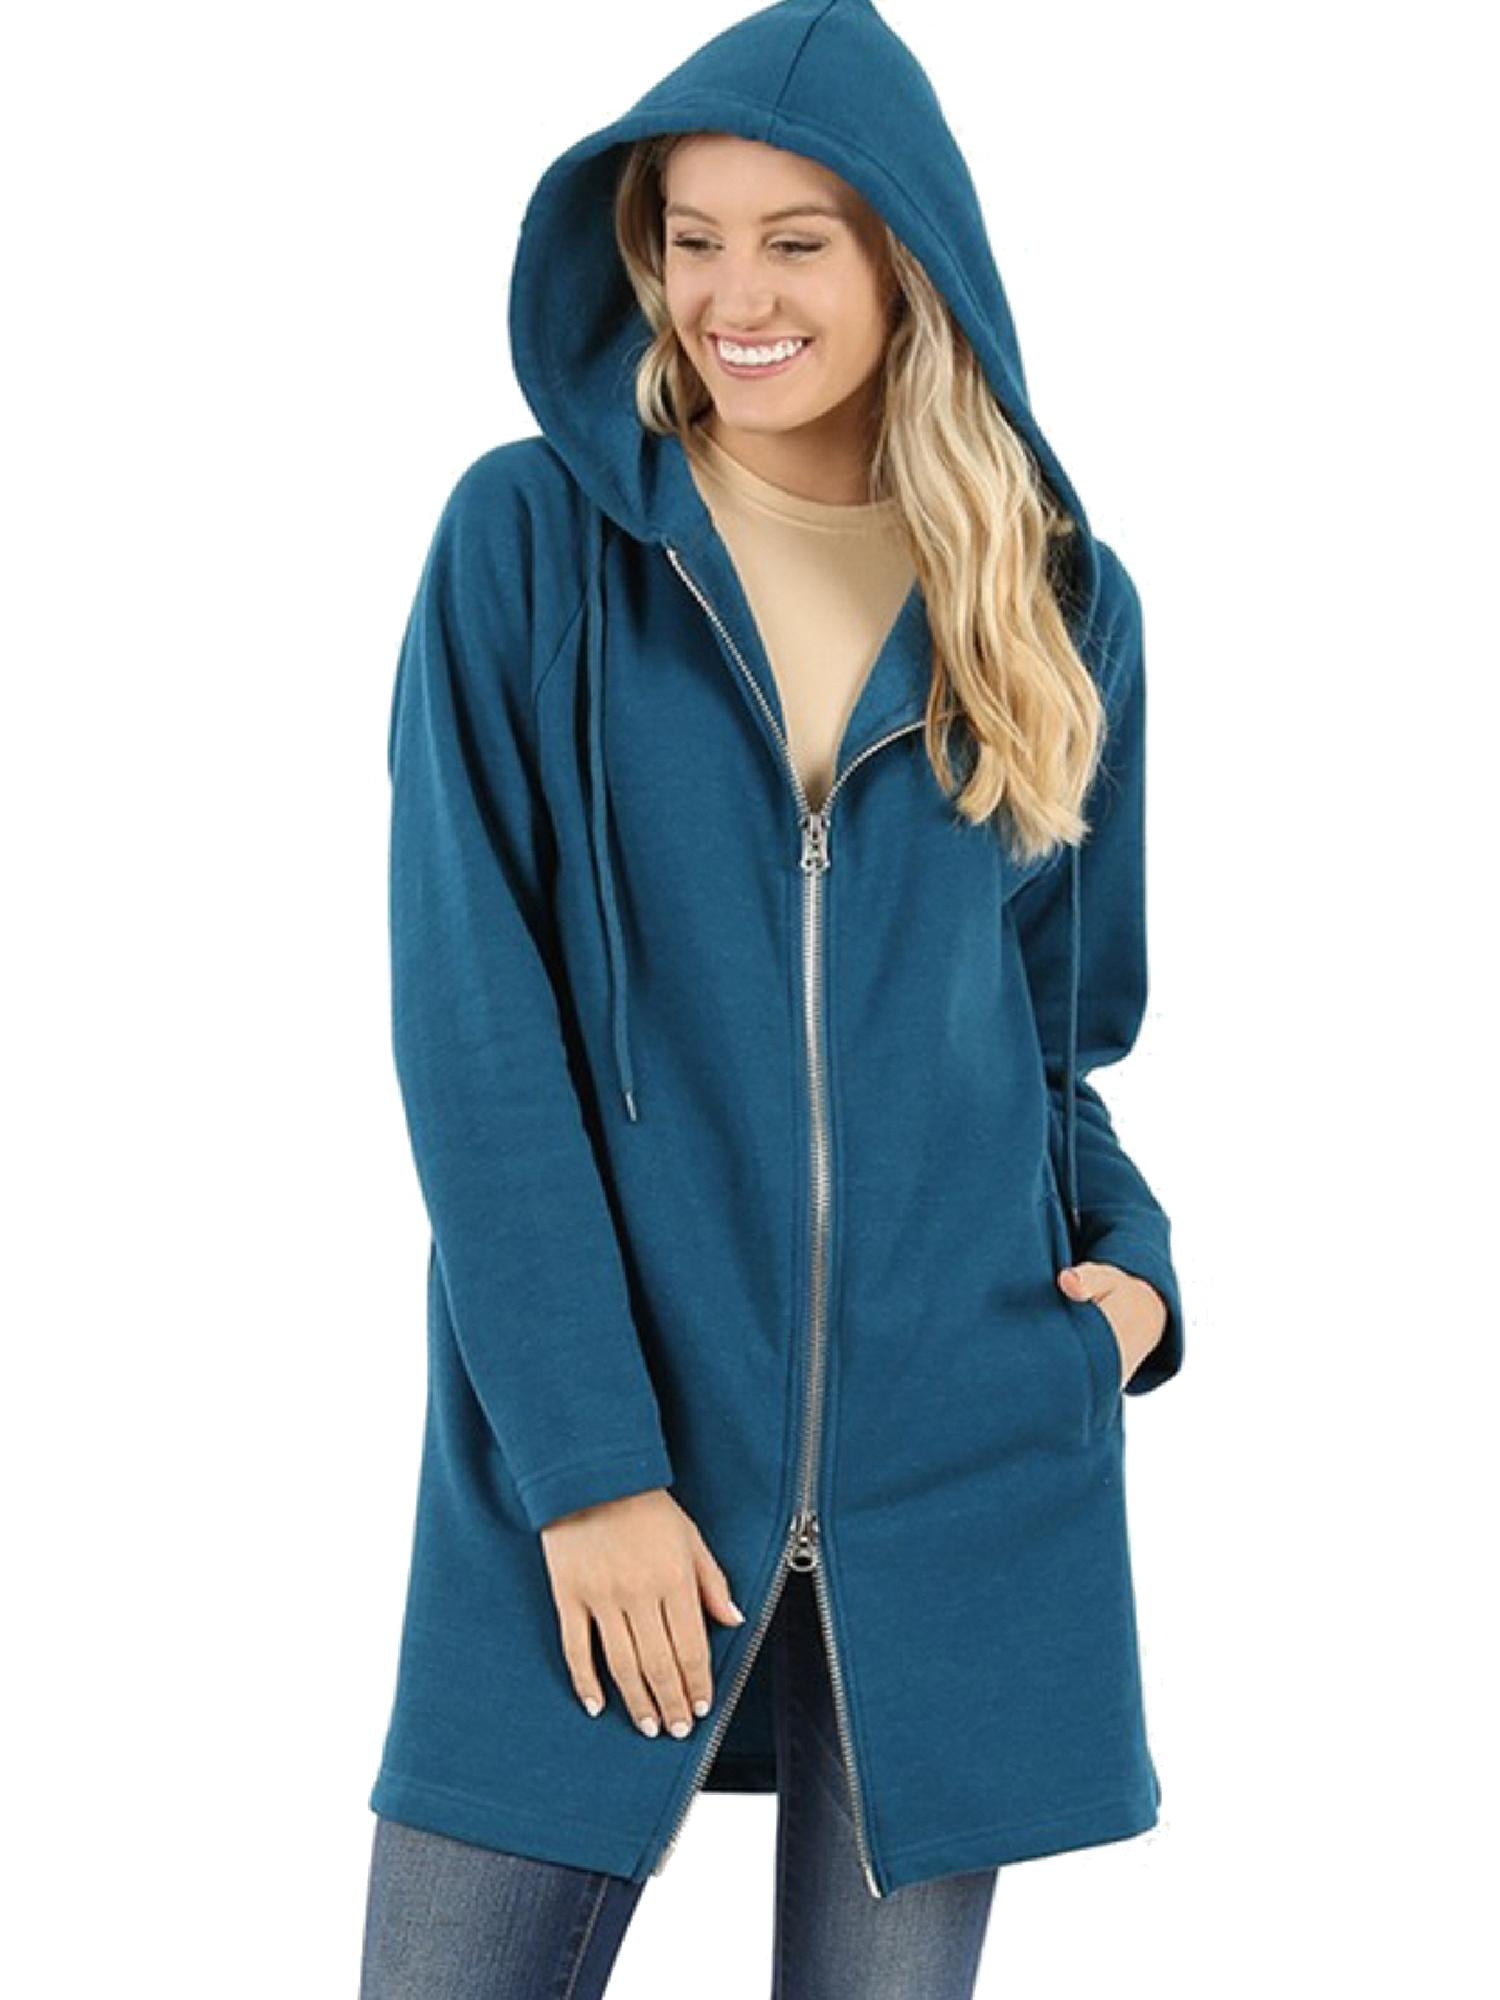 Womens Oversized Warm Zipper Hoodies Casual Long Sleeve Loose Pullover Hooded Sweatshirt Plush with Pockets Tops